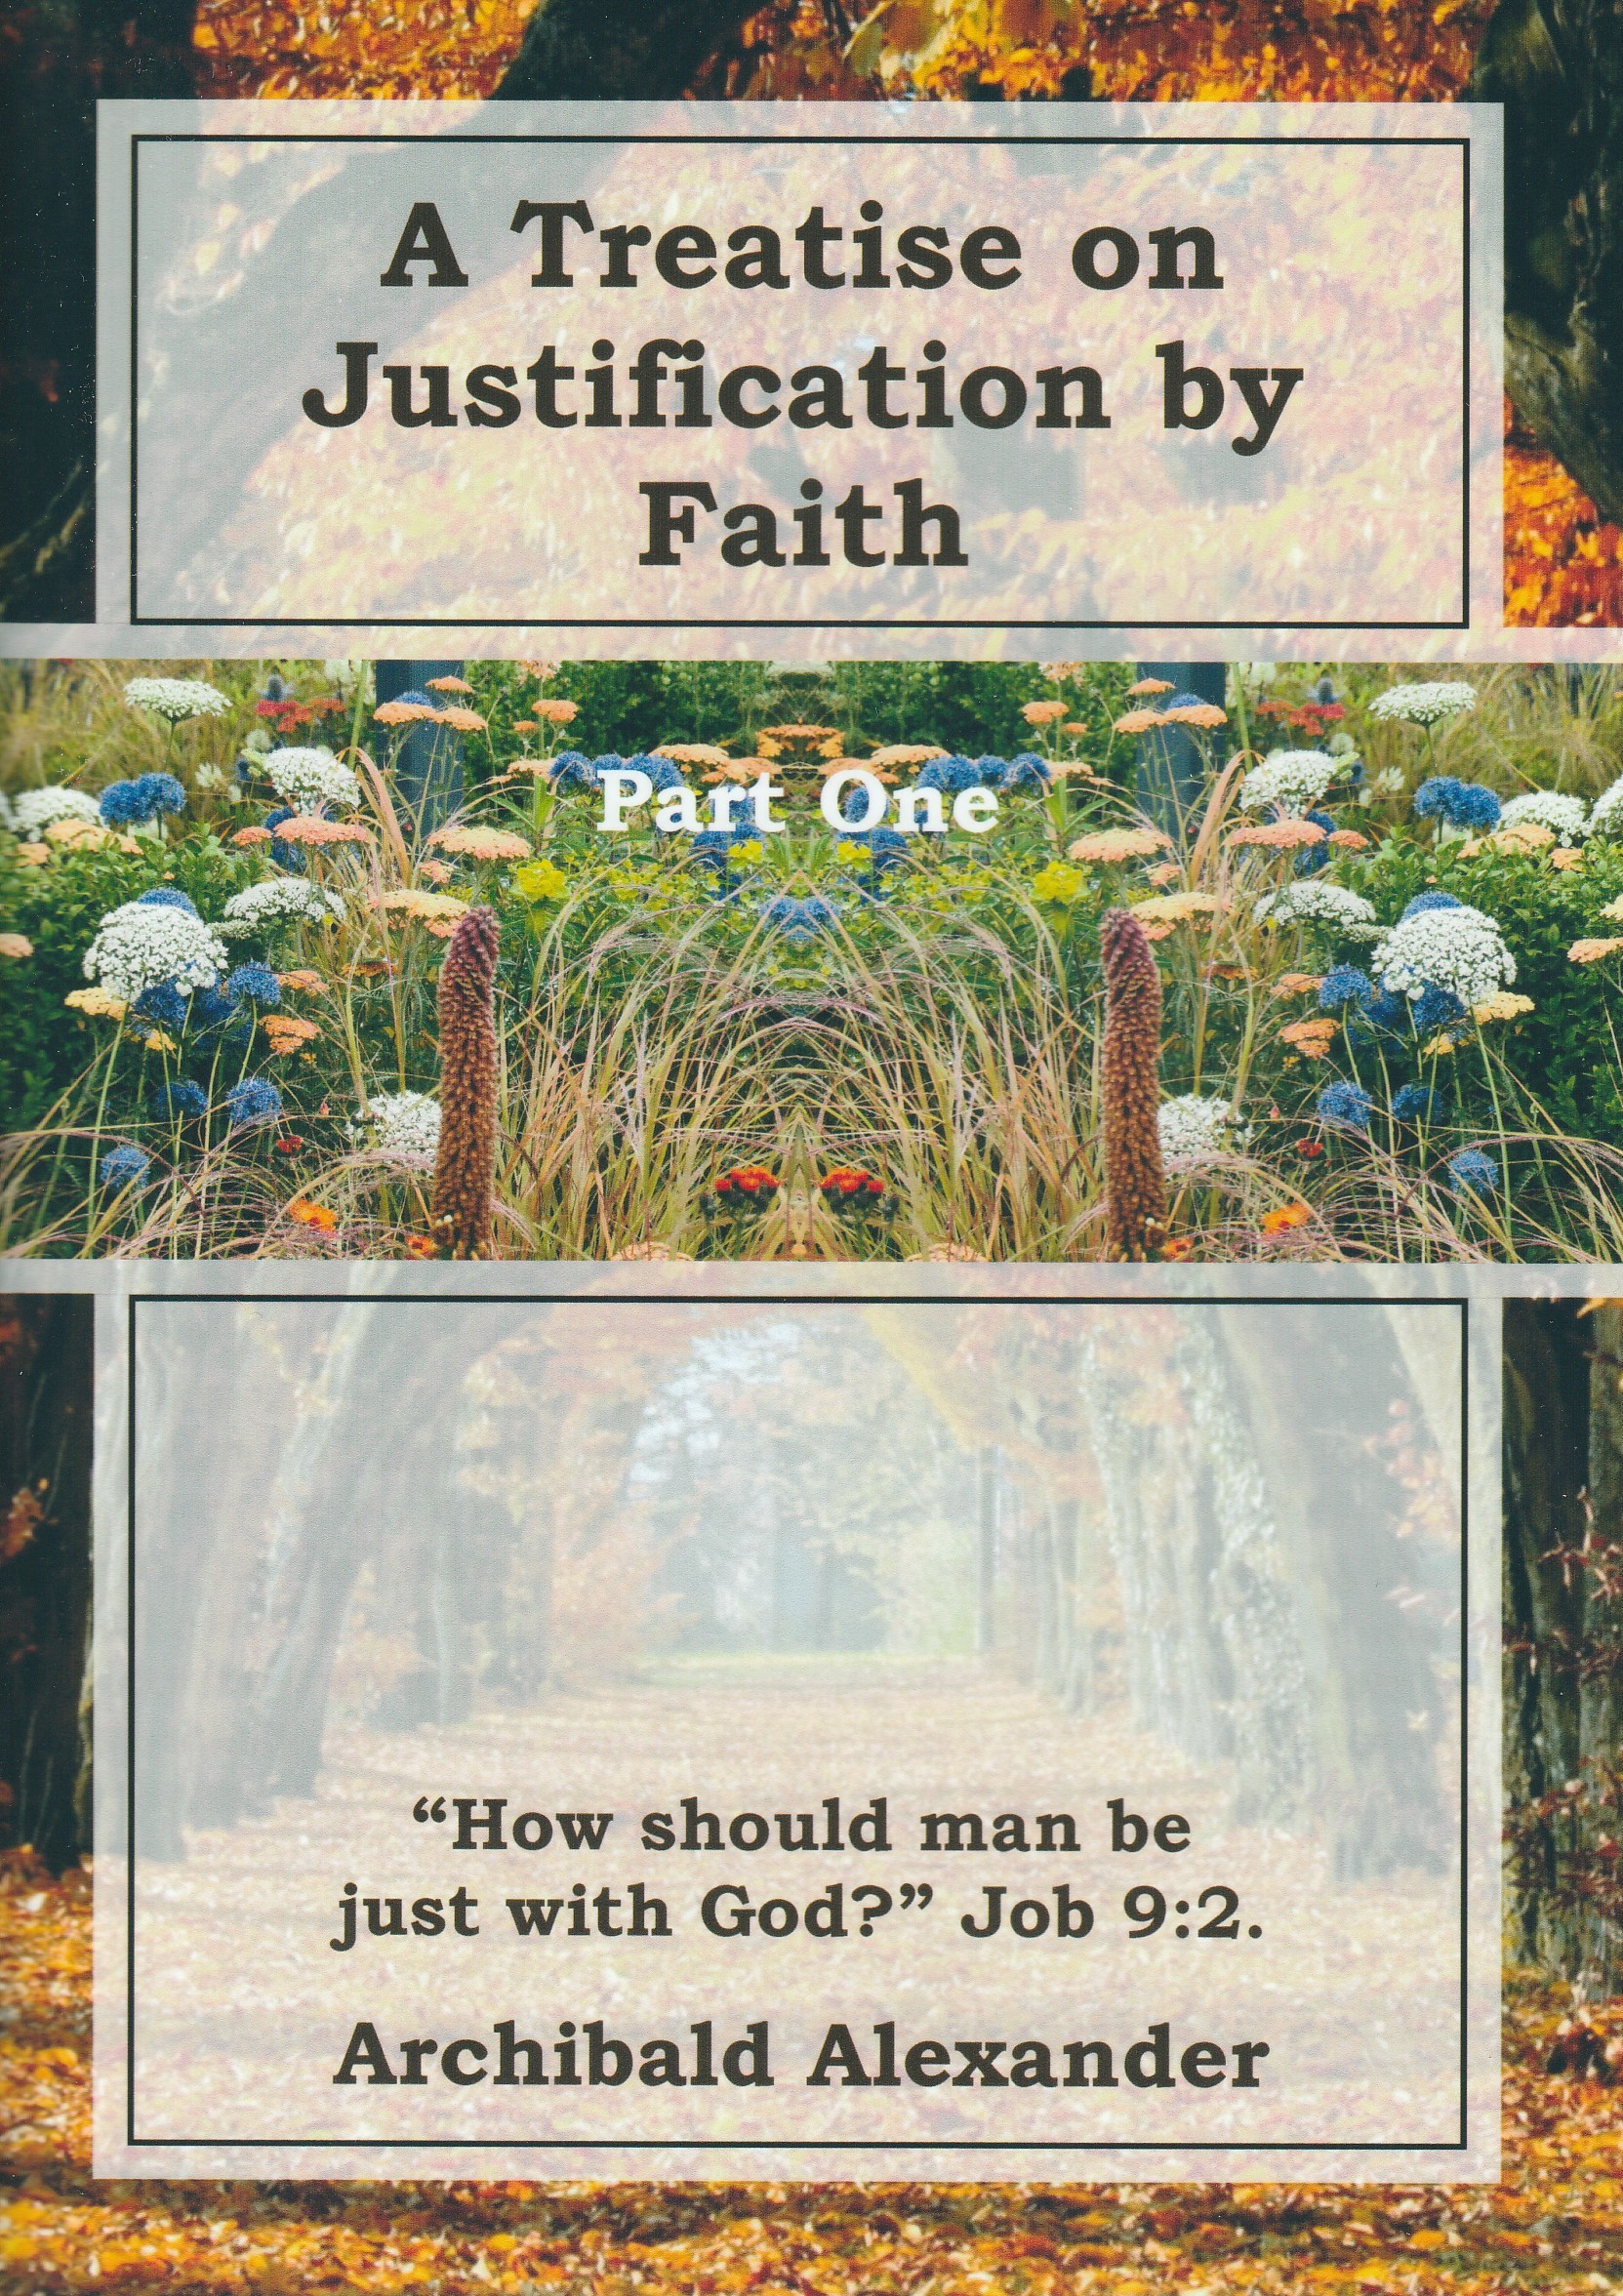 A Treatise on Justification by Faith (Part One)